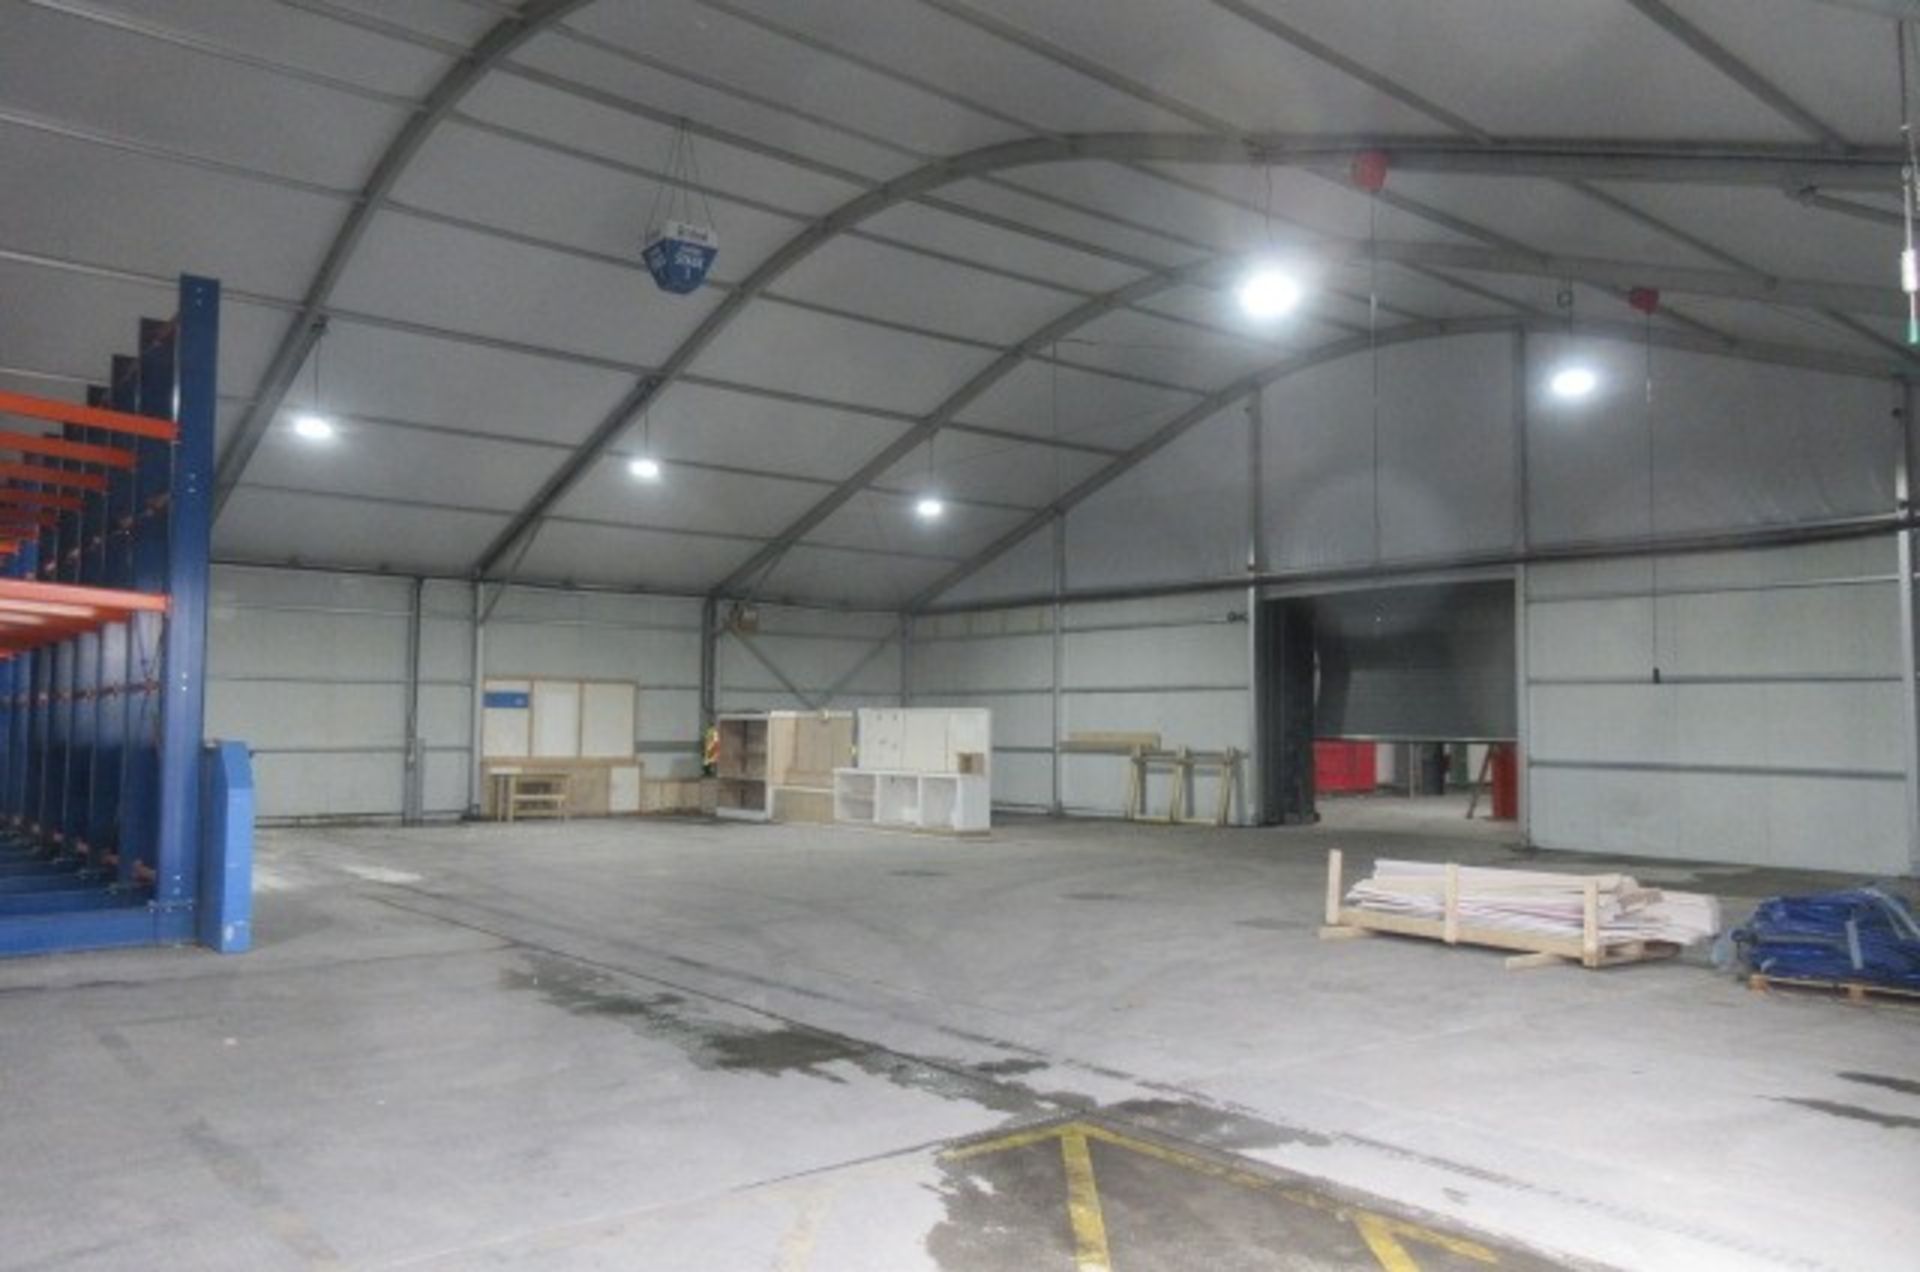 Alloy portal frame temporary building - Image 6 of 11